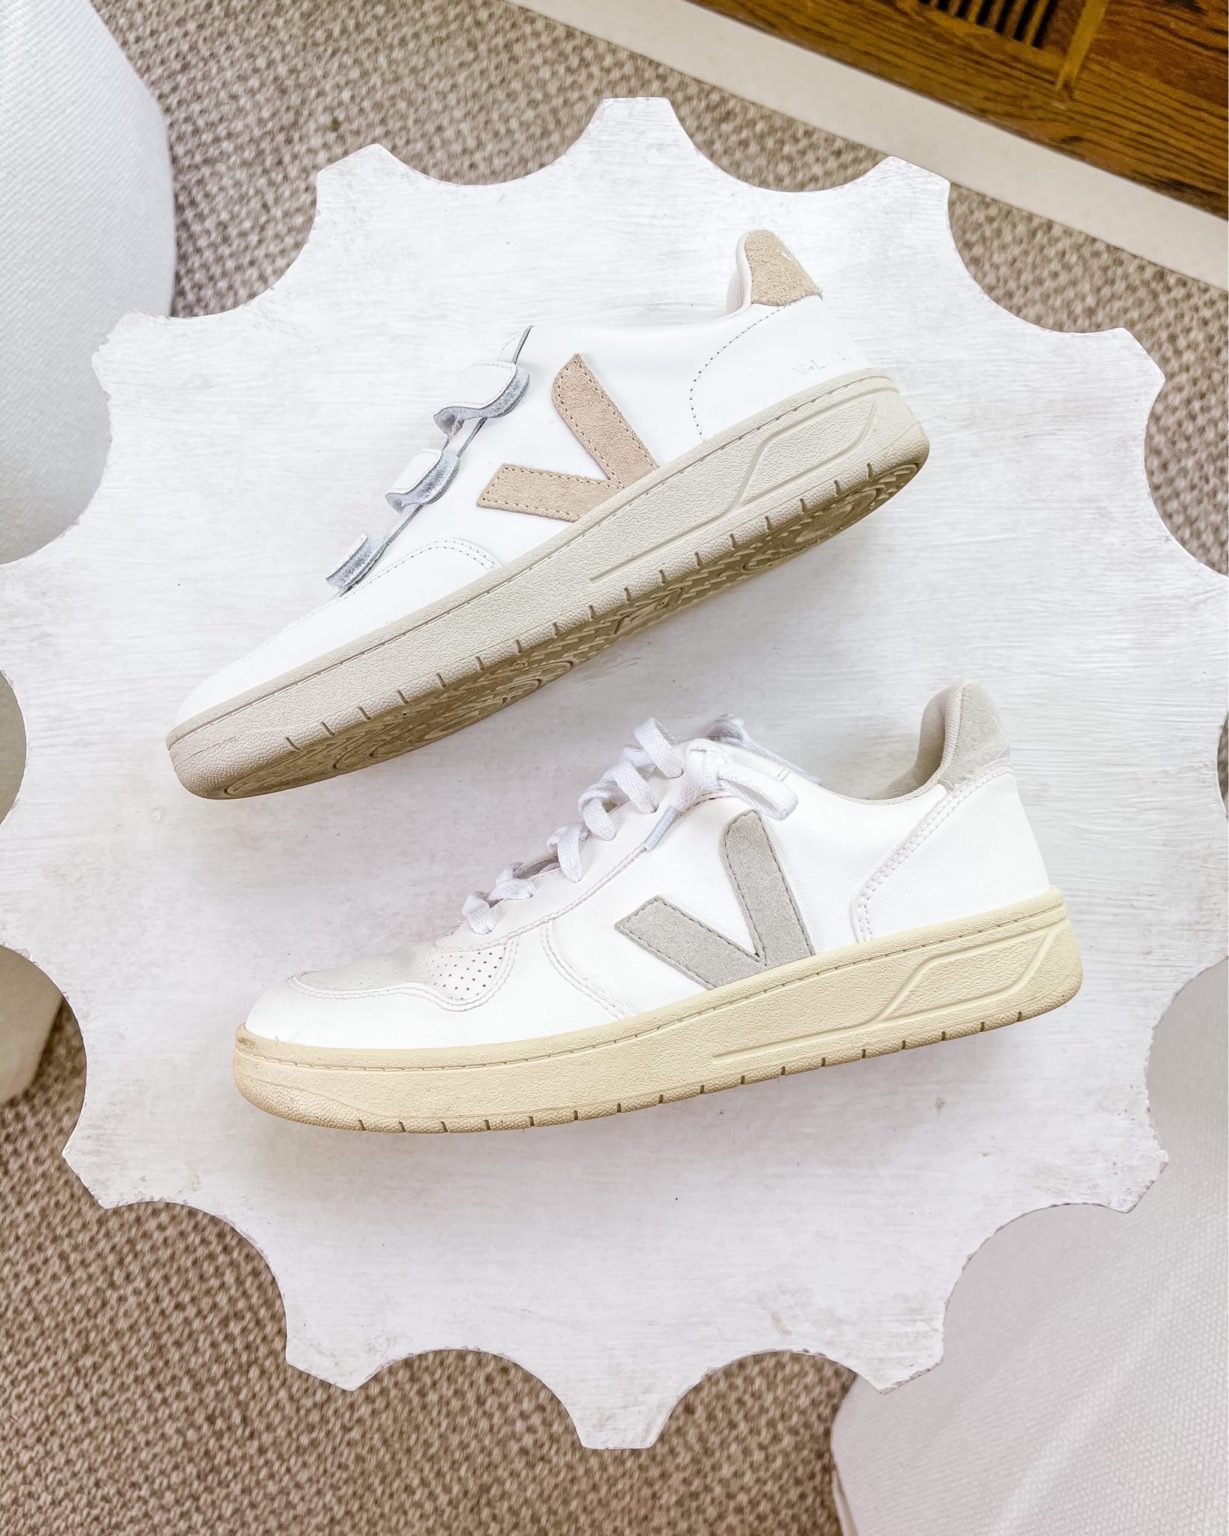 My Honest Veja Sneaker Review and Guide | Natalie Yerger